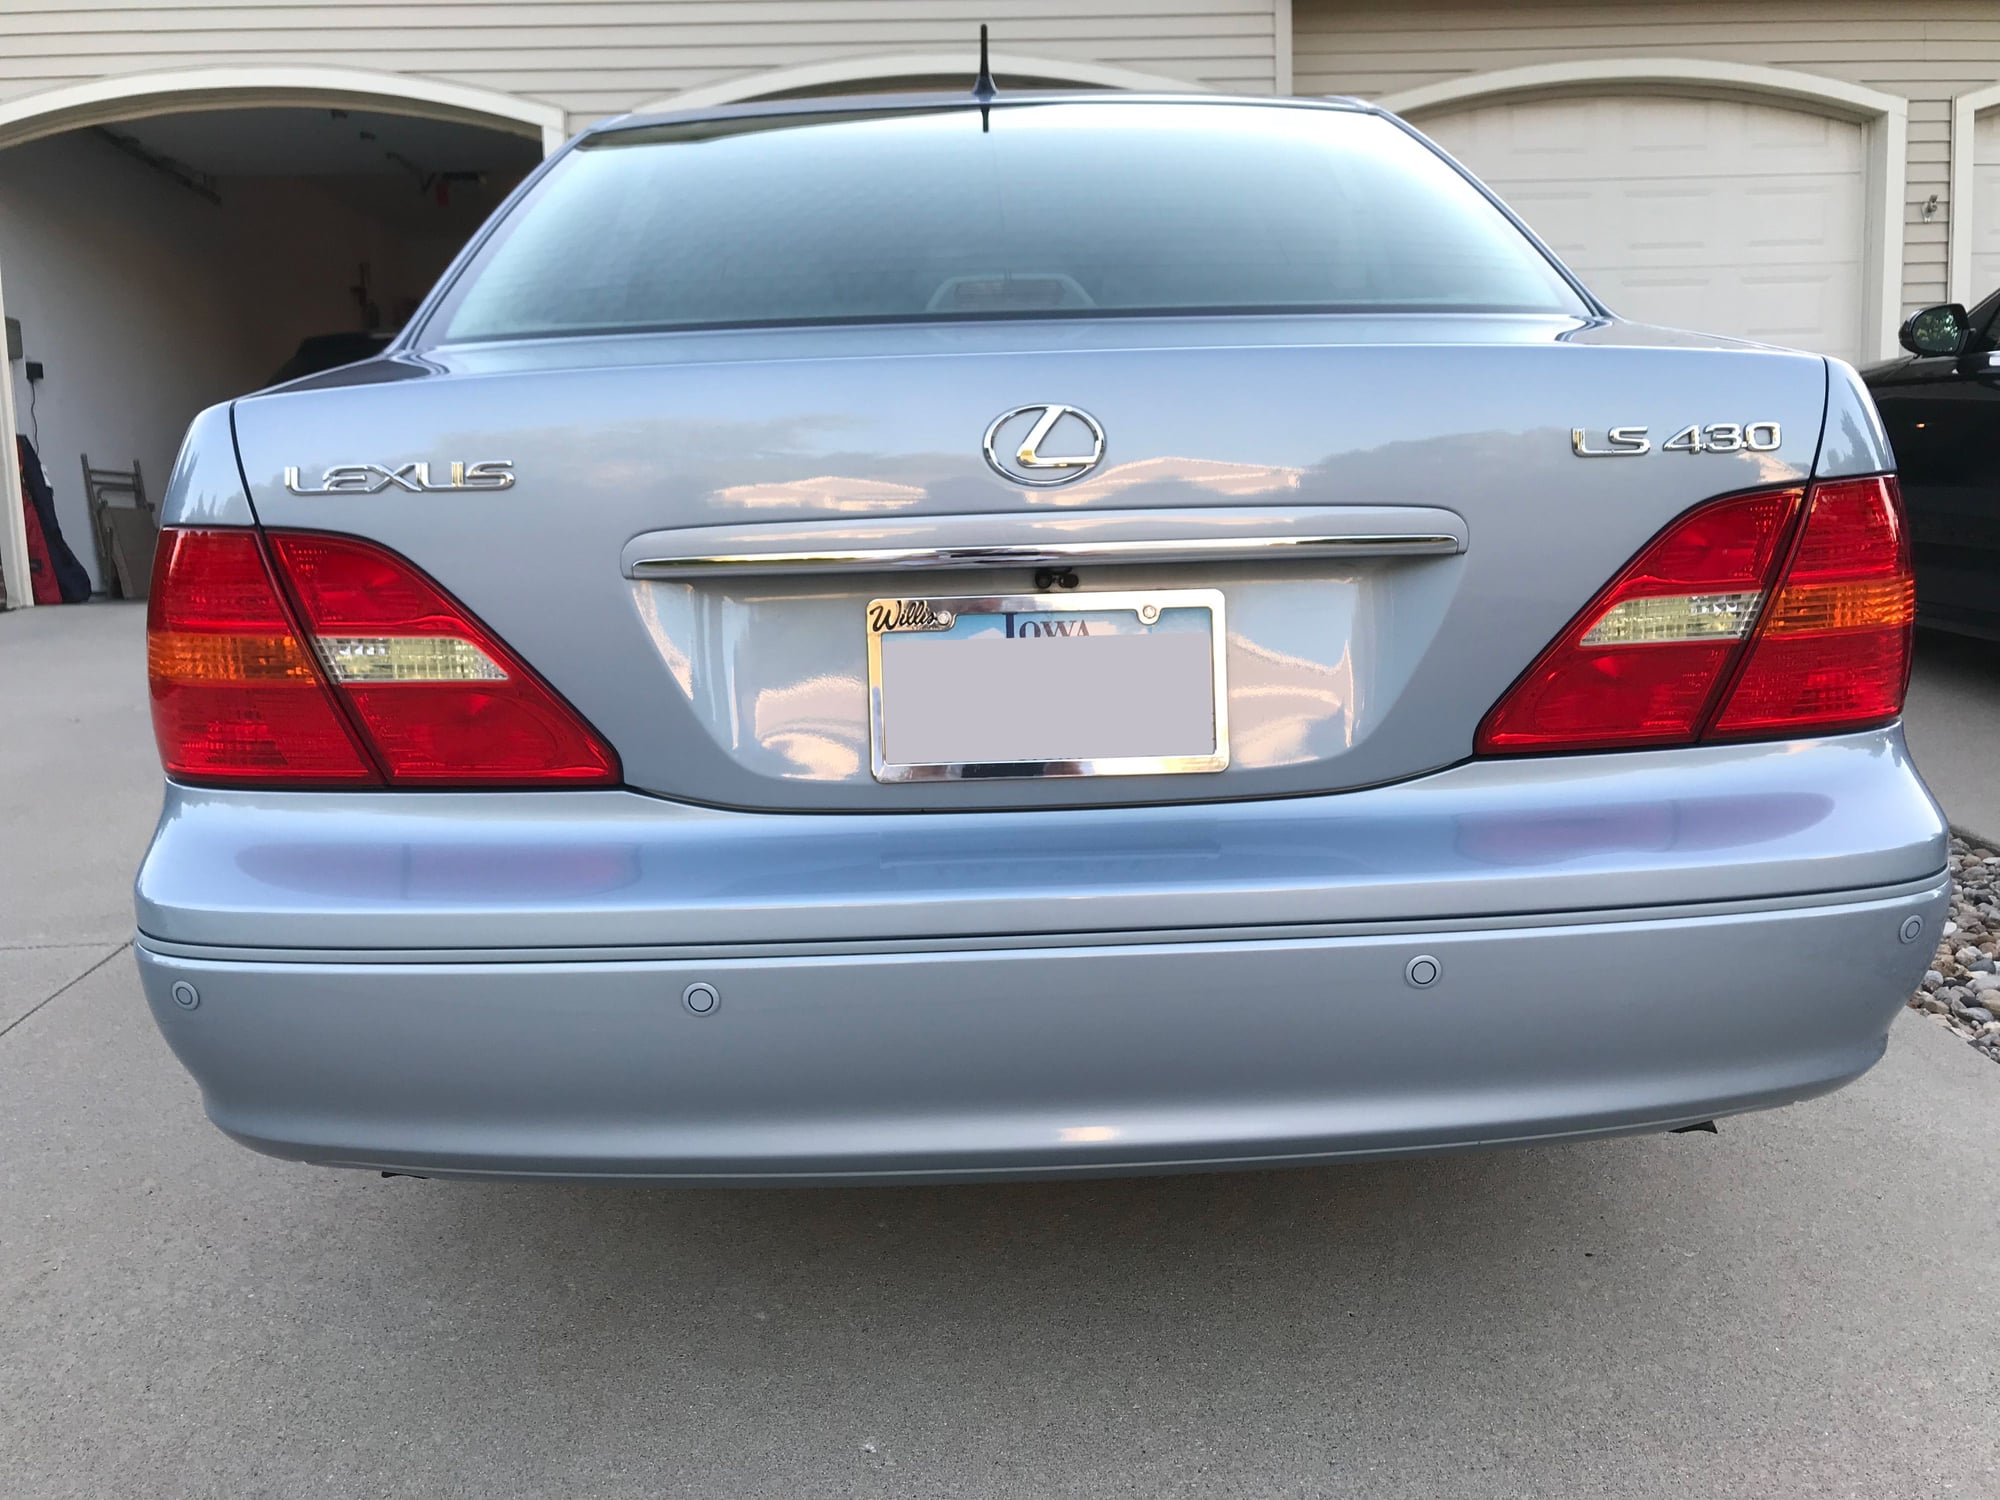 2002 Lexus LS430 - Two Owner Lexus 2002 LS 430 Ultra, Excellent 130,332 Miles - Used - VIN jthbn30f620092264 - 8 cyl - 2WD - Automatic - Sedan - Blue - Ames, IA 50010, United States